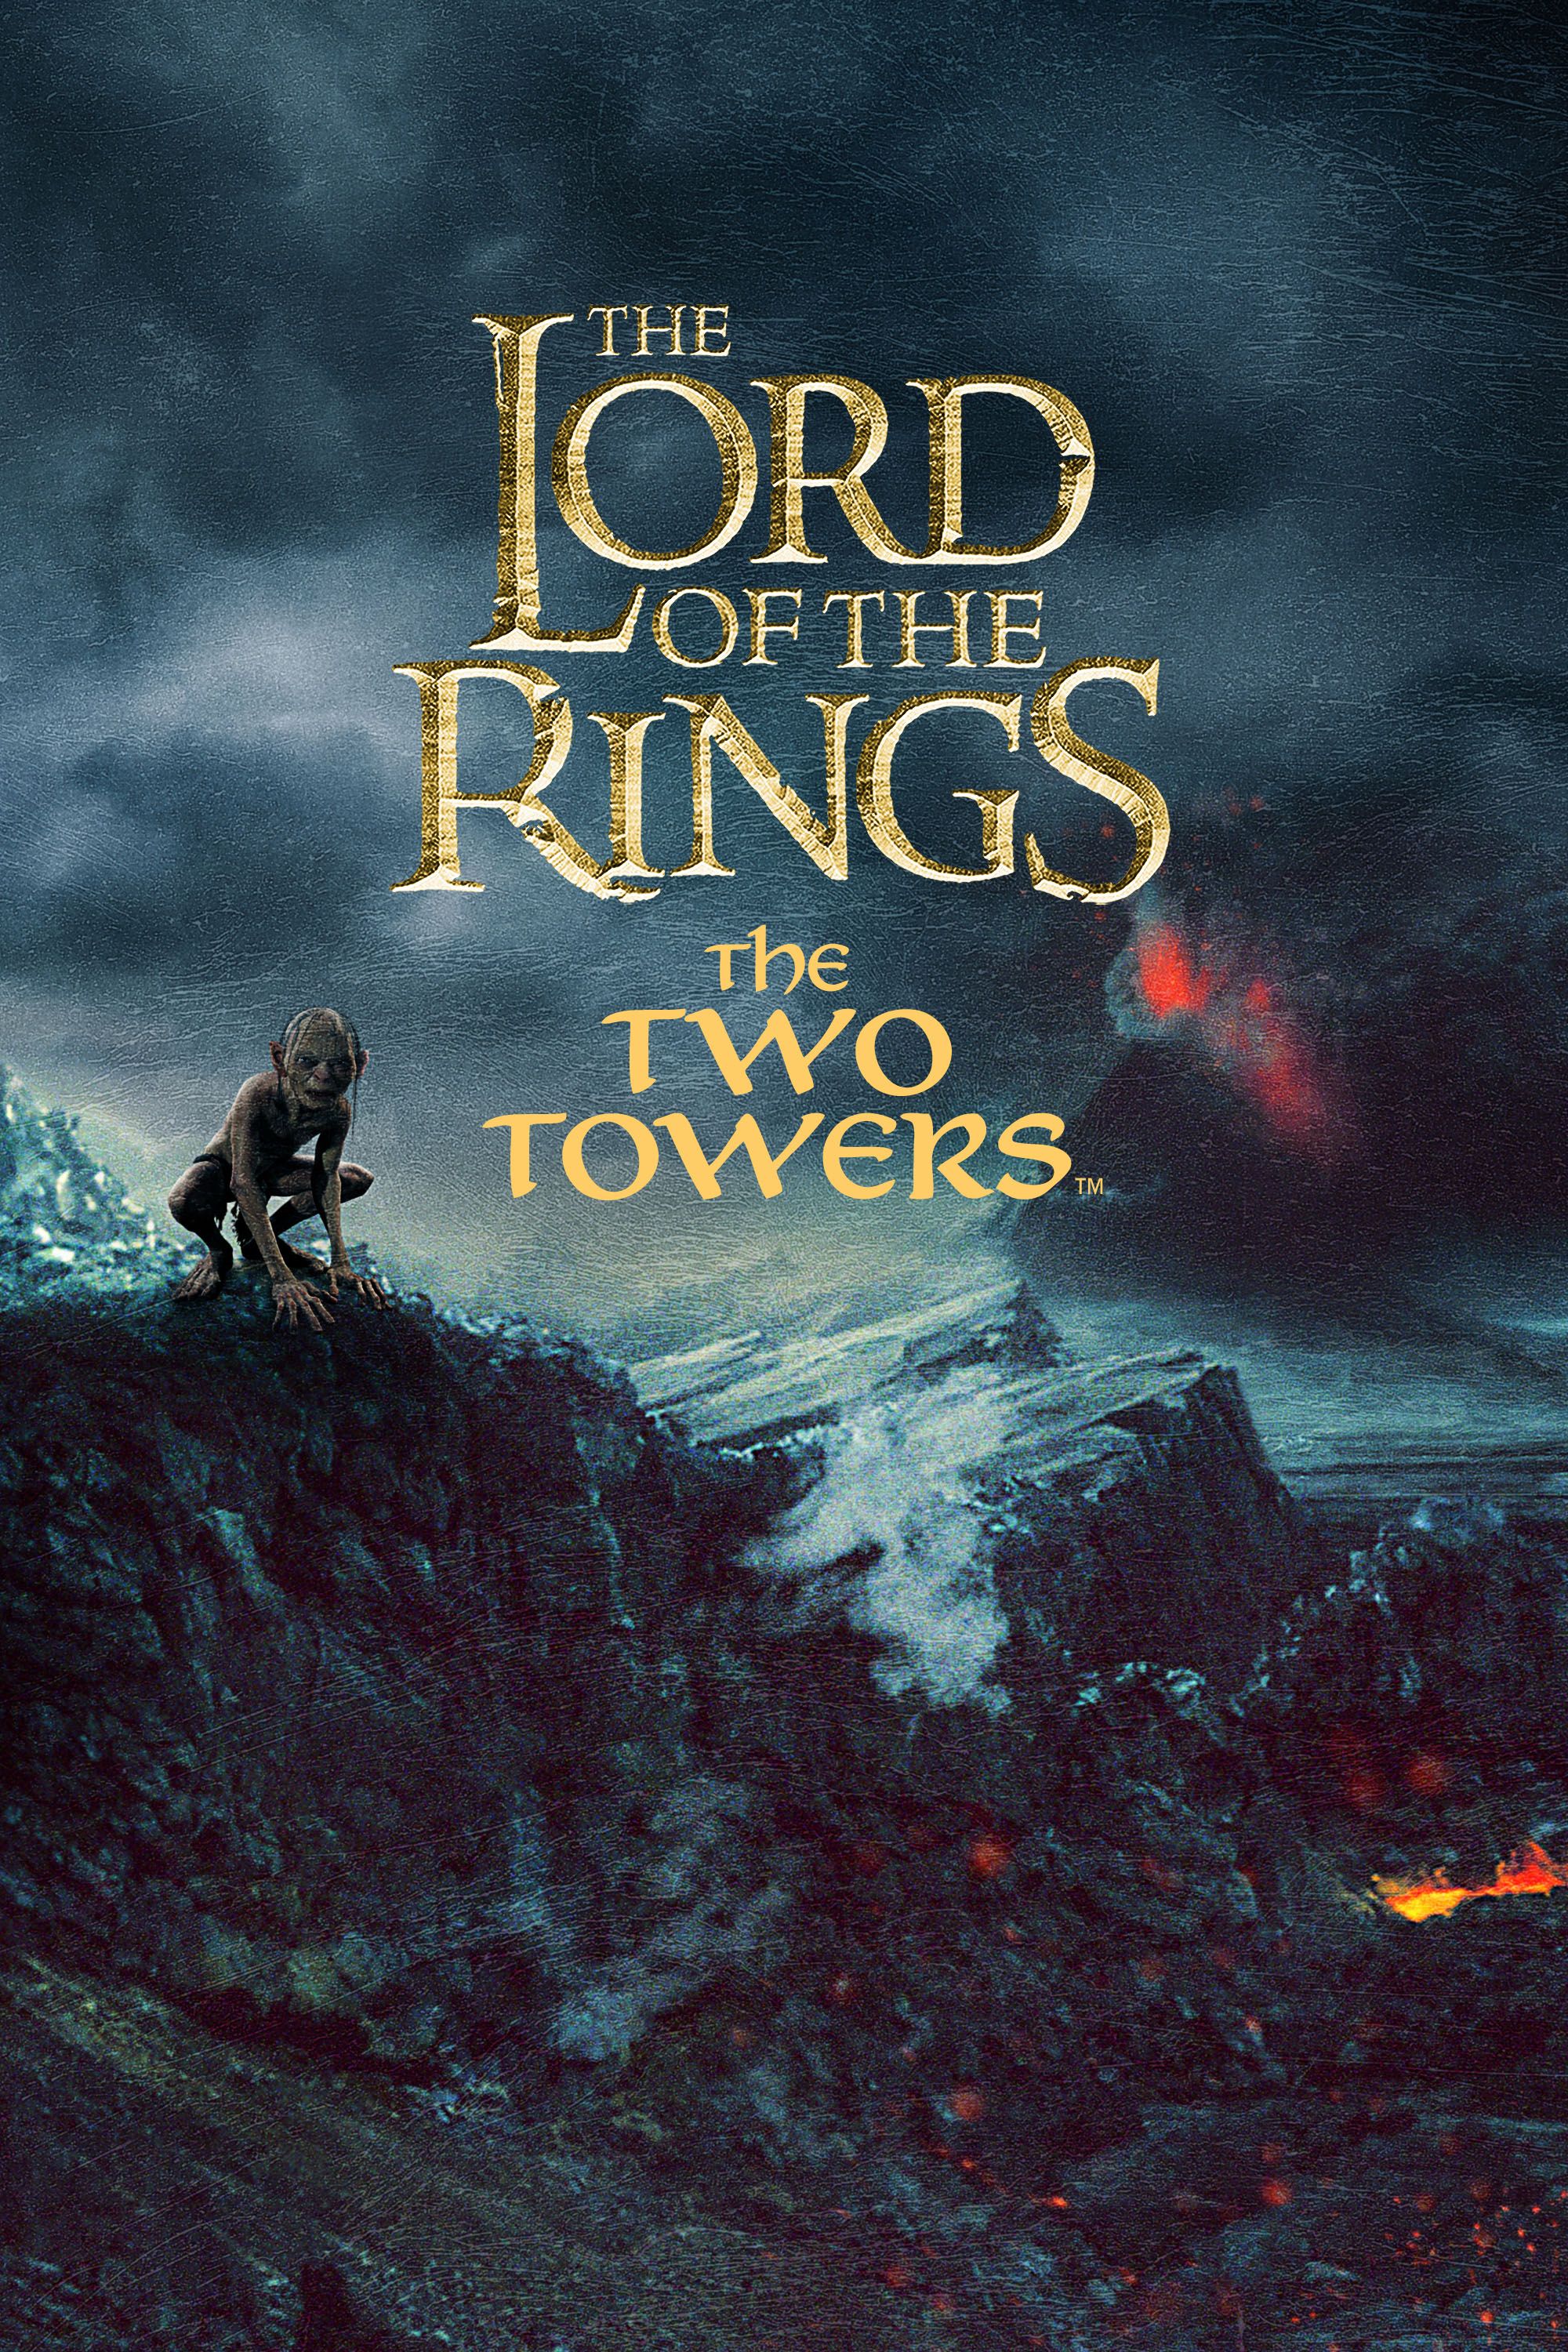 The Lord of the Rings: The Two Towers Film Analysis